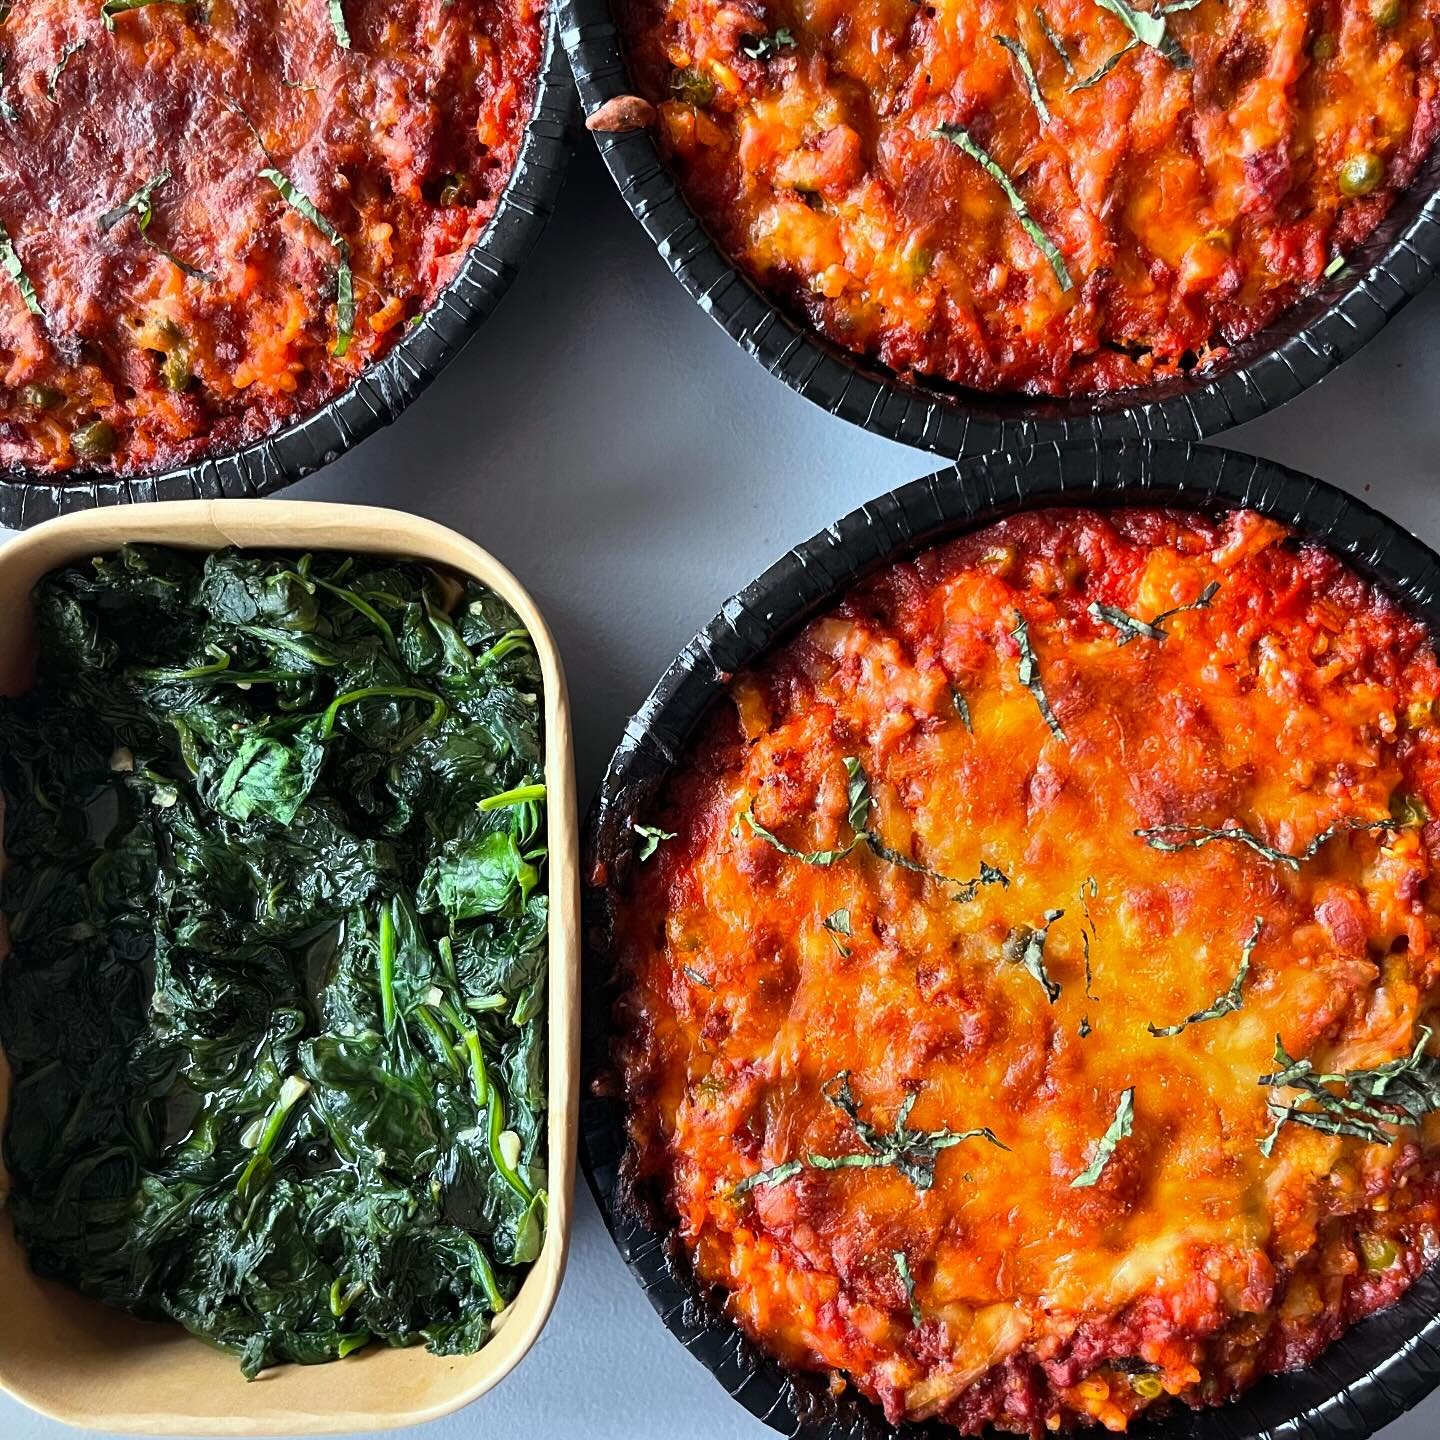 ORDER UP : Riso al Forno (Baked Arborio rice with meat sauce and cheese), Saut&eacute;ed Spinach🇮🇹

#globalcuisine #foodporn #appleton #greenbay #food #neenah #veteranowned #foodlover #veterans #letmecookforyou #home #madefromscratch #homedelivery 